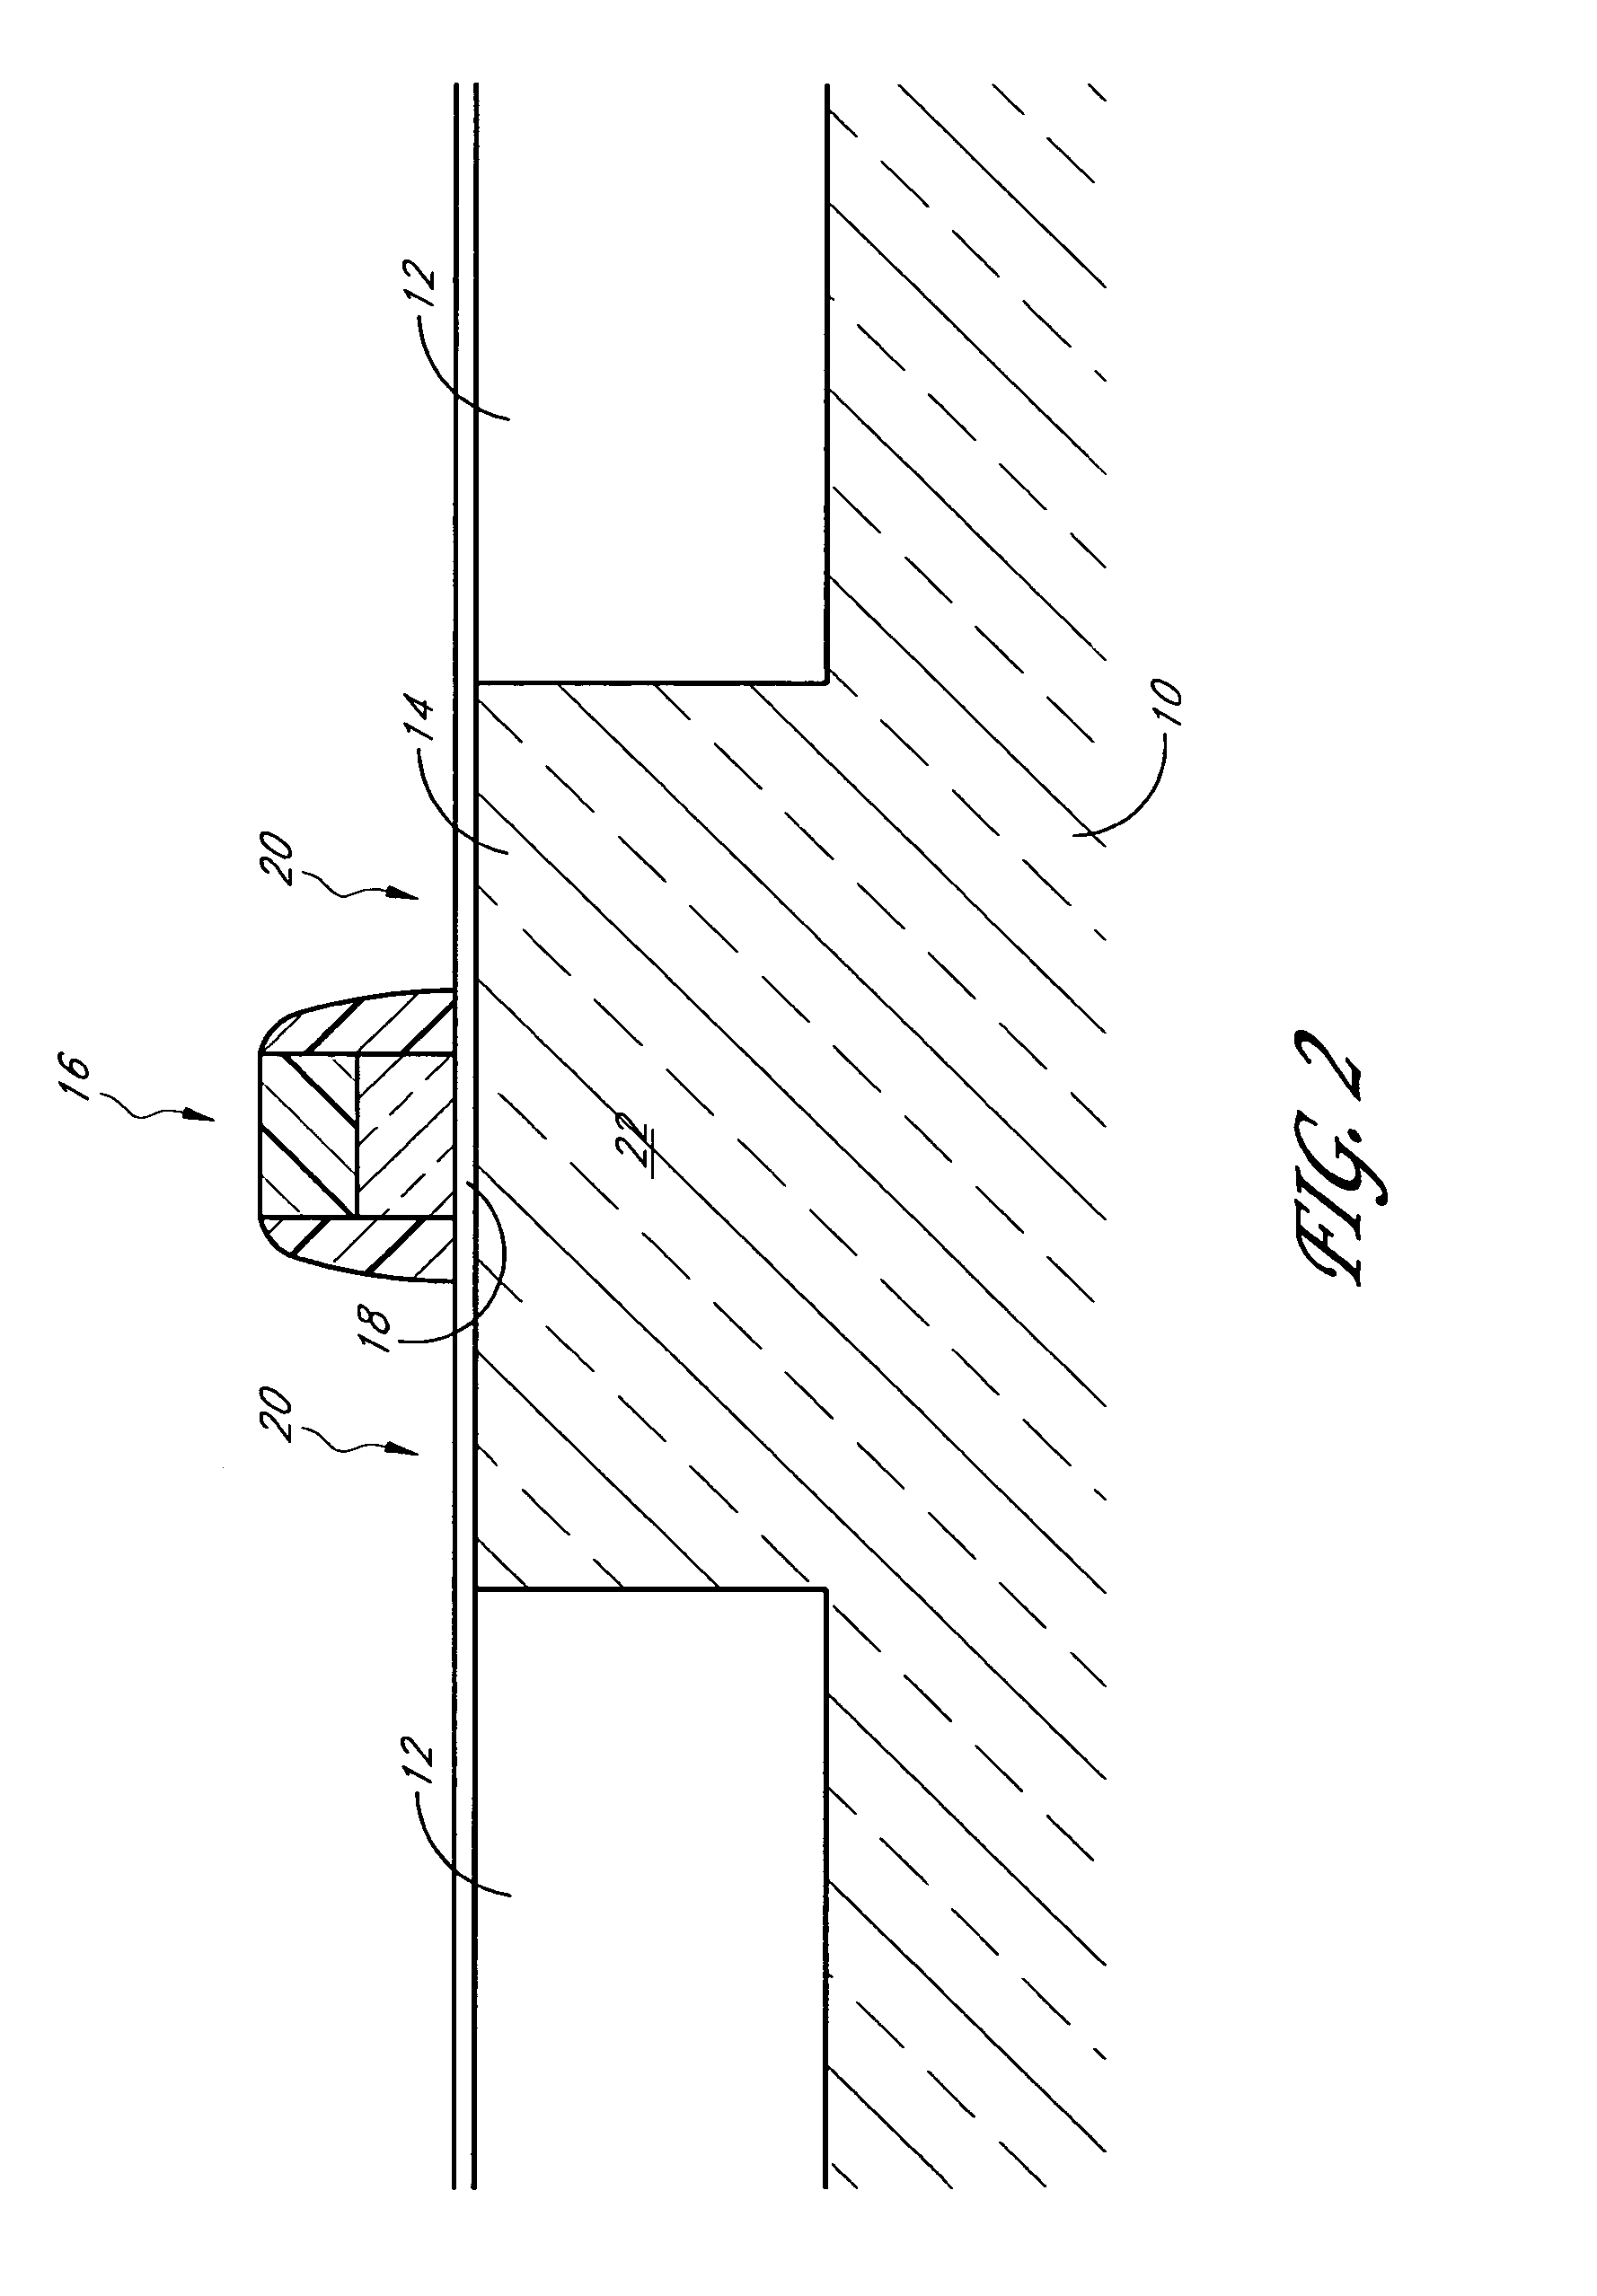 Epitaxial deposition of doped semiconductor materials